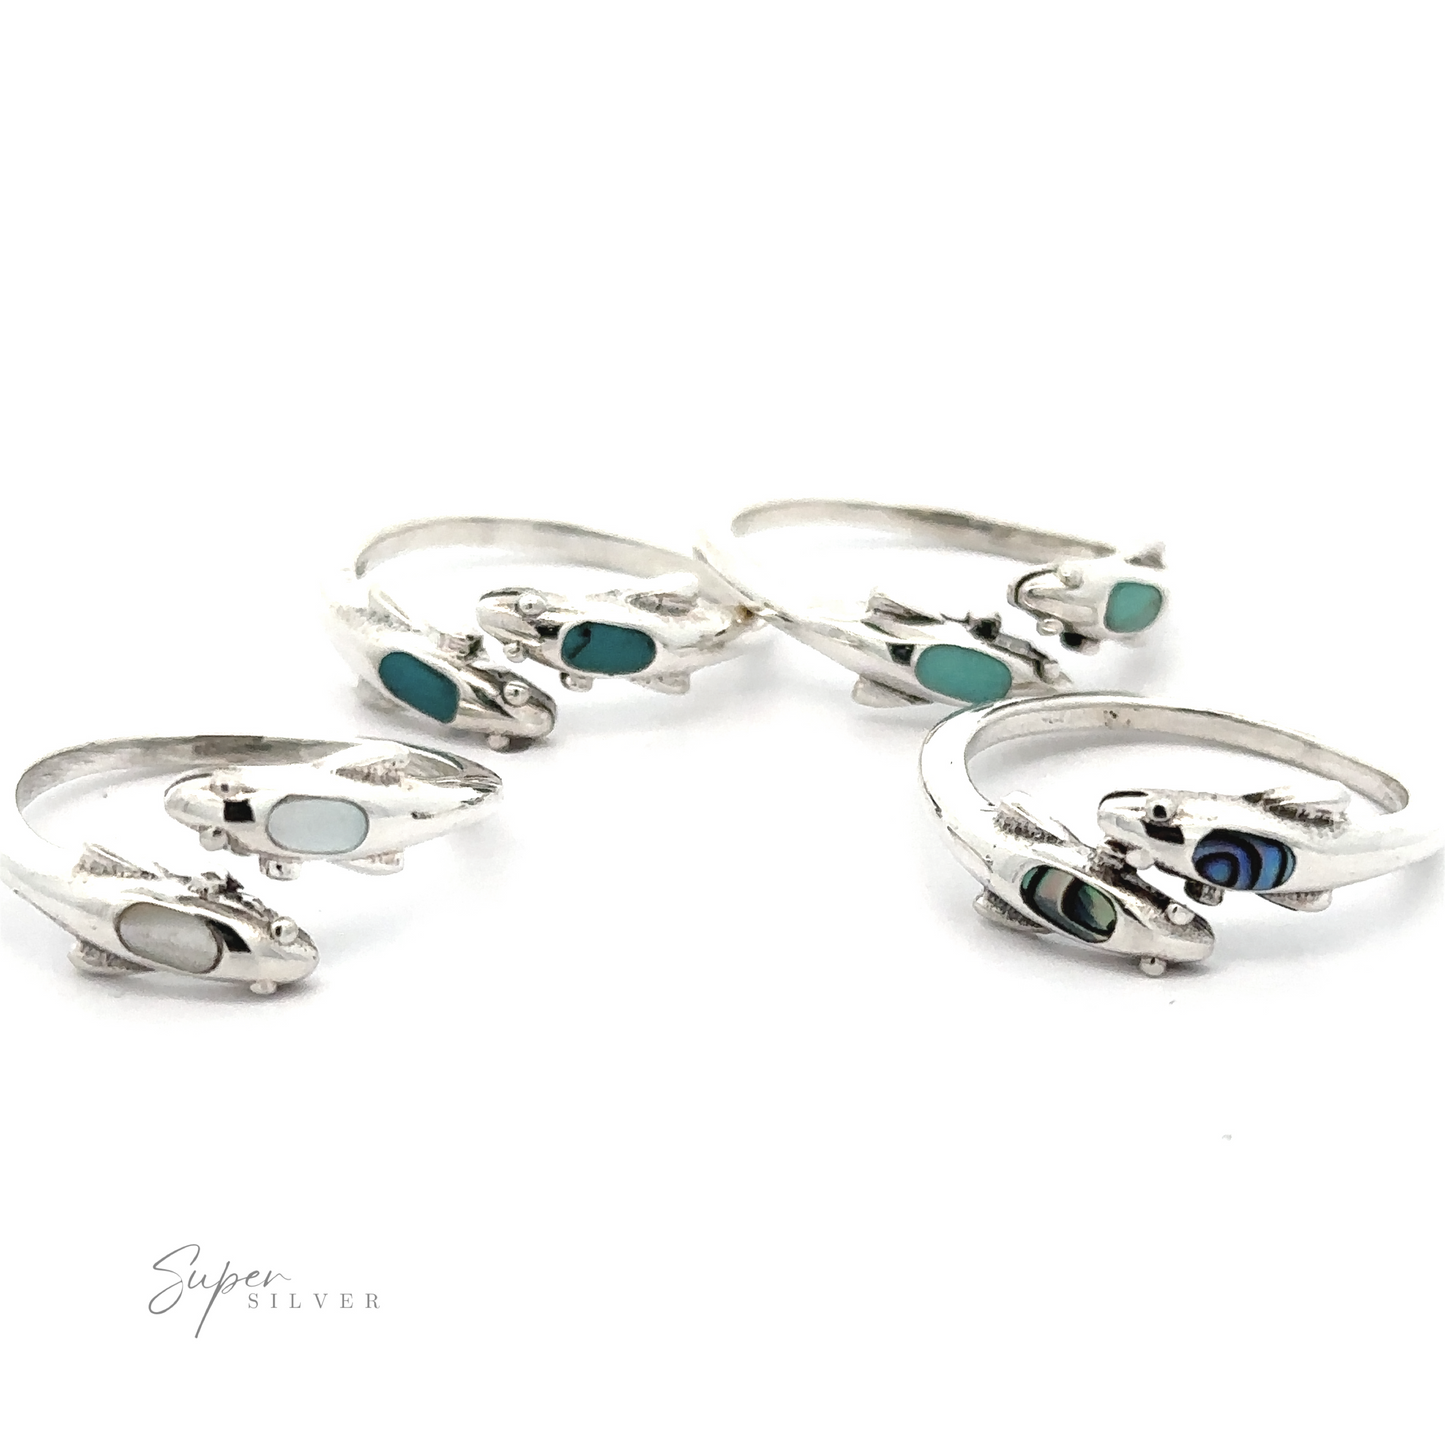 Four sterling silver adjustable Dainty Inlaid Dolphin rings with turquoise and black bead accents, displayed on a white background.